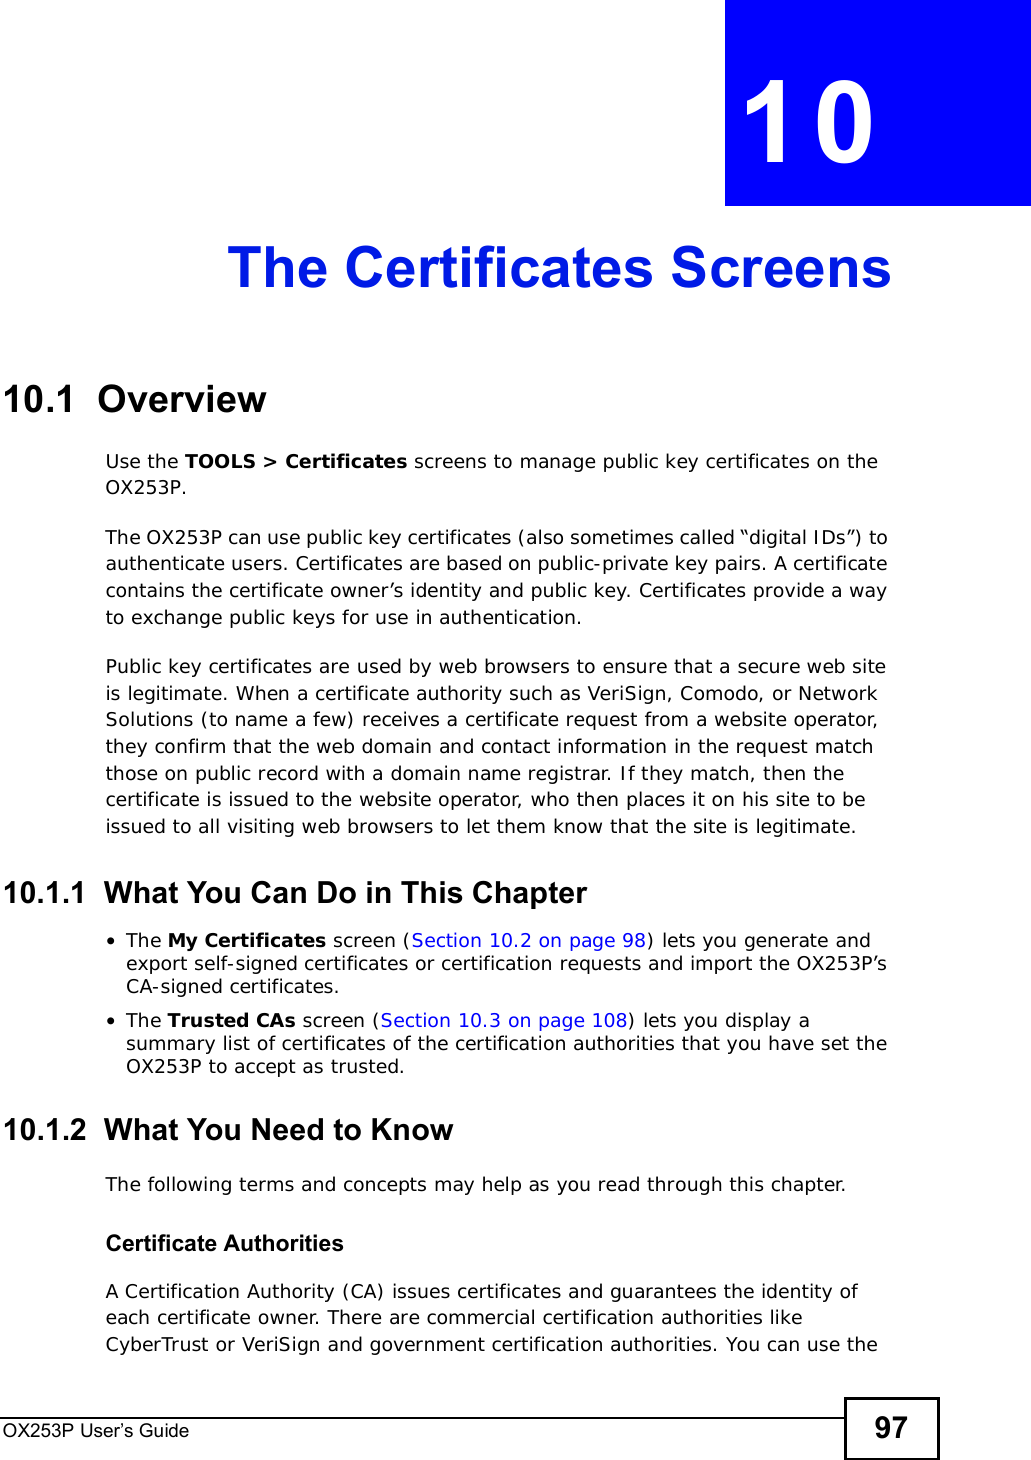 OX253P User’s Guide 97CHAPTER 10The Certificates Screens10.1  OverviewUse the TOOLS &gt; Certificates screens to manage public key certificates on the OX253P.The OX253P can use public key certificates (also sometimes called “digital IDs”) to authenticate users. Certificates are based on public-private key pairs. A certificate contains the certificate owner’s identity and public key. Certificates provide a way to exchange public keys for use in authentication.Public key certificates are used by web browsers to ensure that a secure web site is legitimate. When a certificate authority such as VeriSign, Comodo, or Network Solutions (to name a few) receives a certificate request from a website operator, they confirm that the web domain and contact information in the request match those on public record with a domain name registrar. If they match, then the certificate is issued to the website operator, who then places it on his site to be issued to all visiting web browsers to let them know that the site is legitimate.10.1.1  What You Can Do in This Chapter•The My Certificates screen (Section 10.2 on page 98) lets you generate and export self-signed certificates or certification requests and import the OX253P’s CA-signed certificates.•The Trusted CAs screen (Section 10.3 on page 108) lets you display a summary list of certificates of the certification authorities that you have set the OX253P to accept as trusted.10.1.2  What You Need to KnowThe following terms and concepts may help as you read through this chapter.Certificate AuthoritiesA Certification Authority (CA) issues certificates and guarantees the identity of each certificate owner. There are commercial certification authorities like CyberTrust or VeriSign and government certification authorities. You can use the 